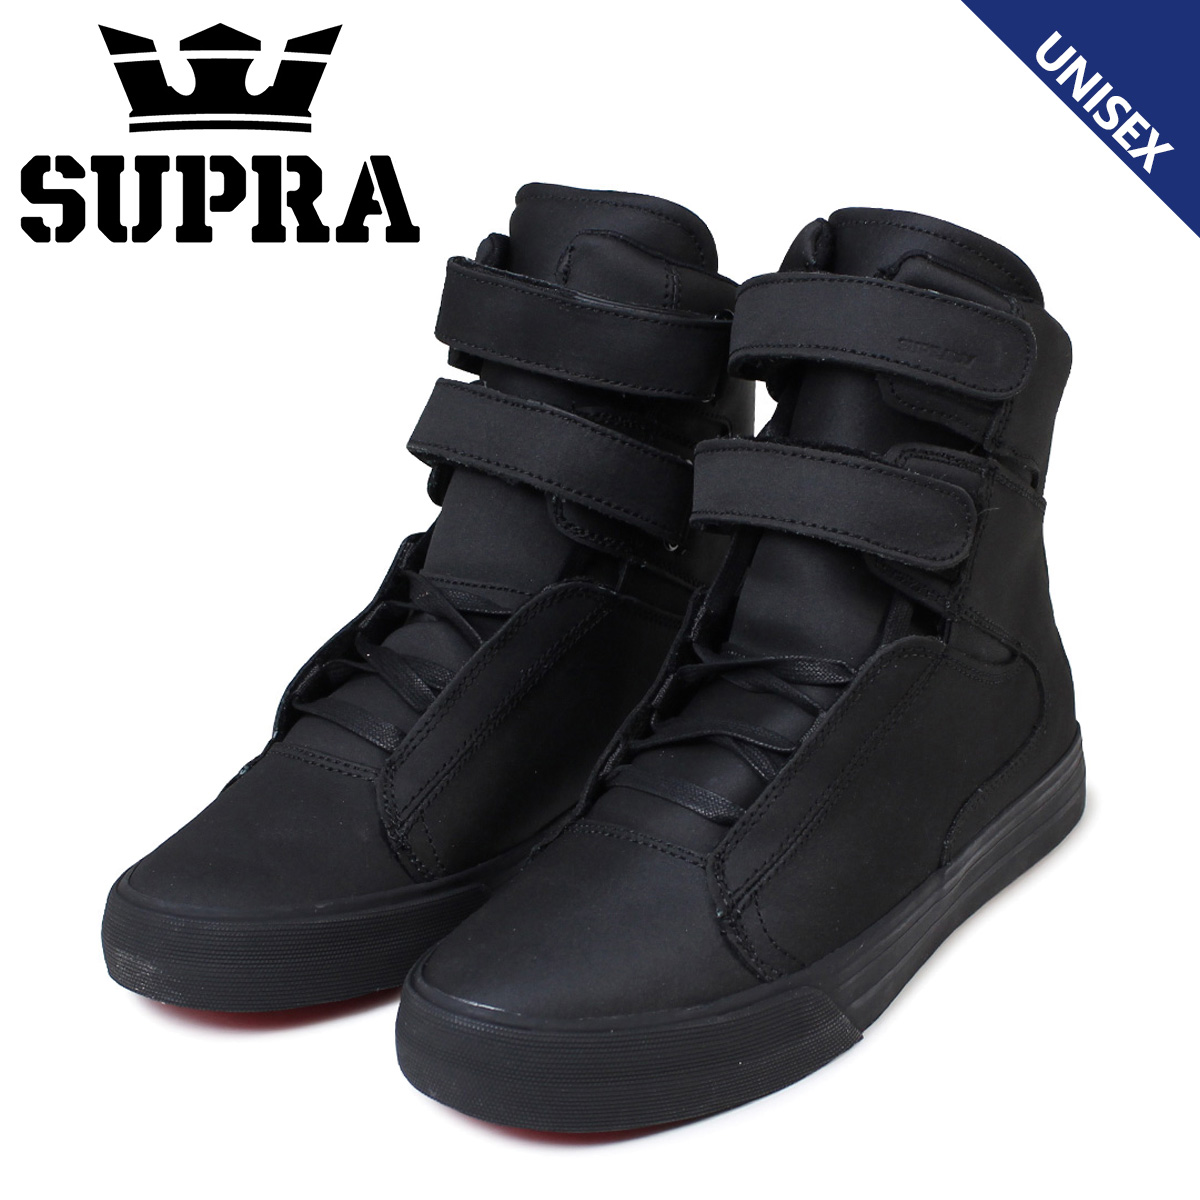 where can i buy supra shoes